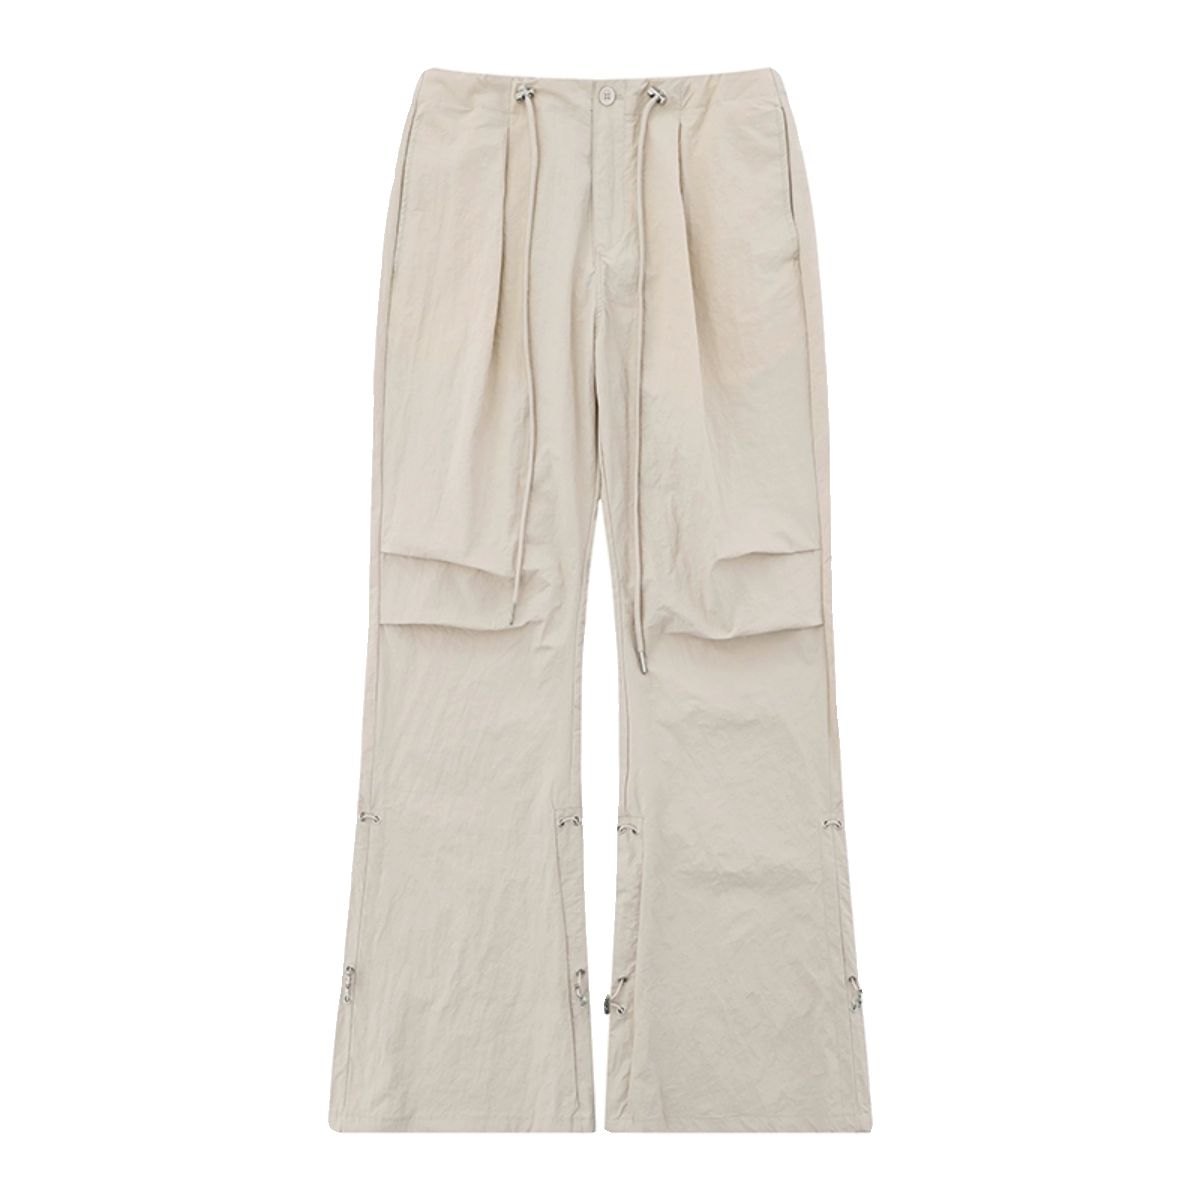 Drawstring Waist Pleats Track Pants Korean Street Fashion Pants By Mr Nearly Shop Online at OH Vault